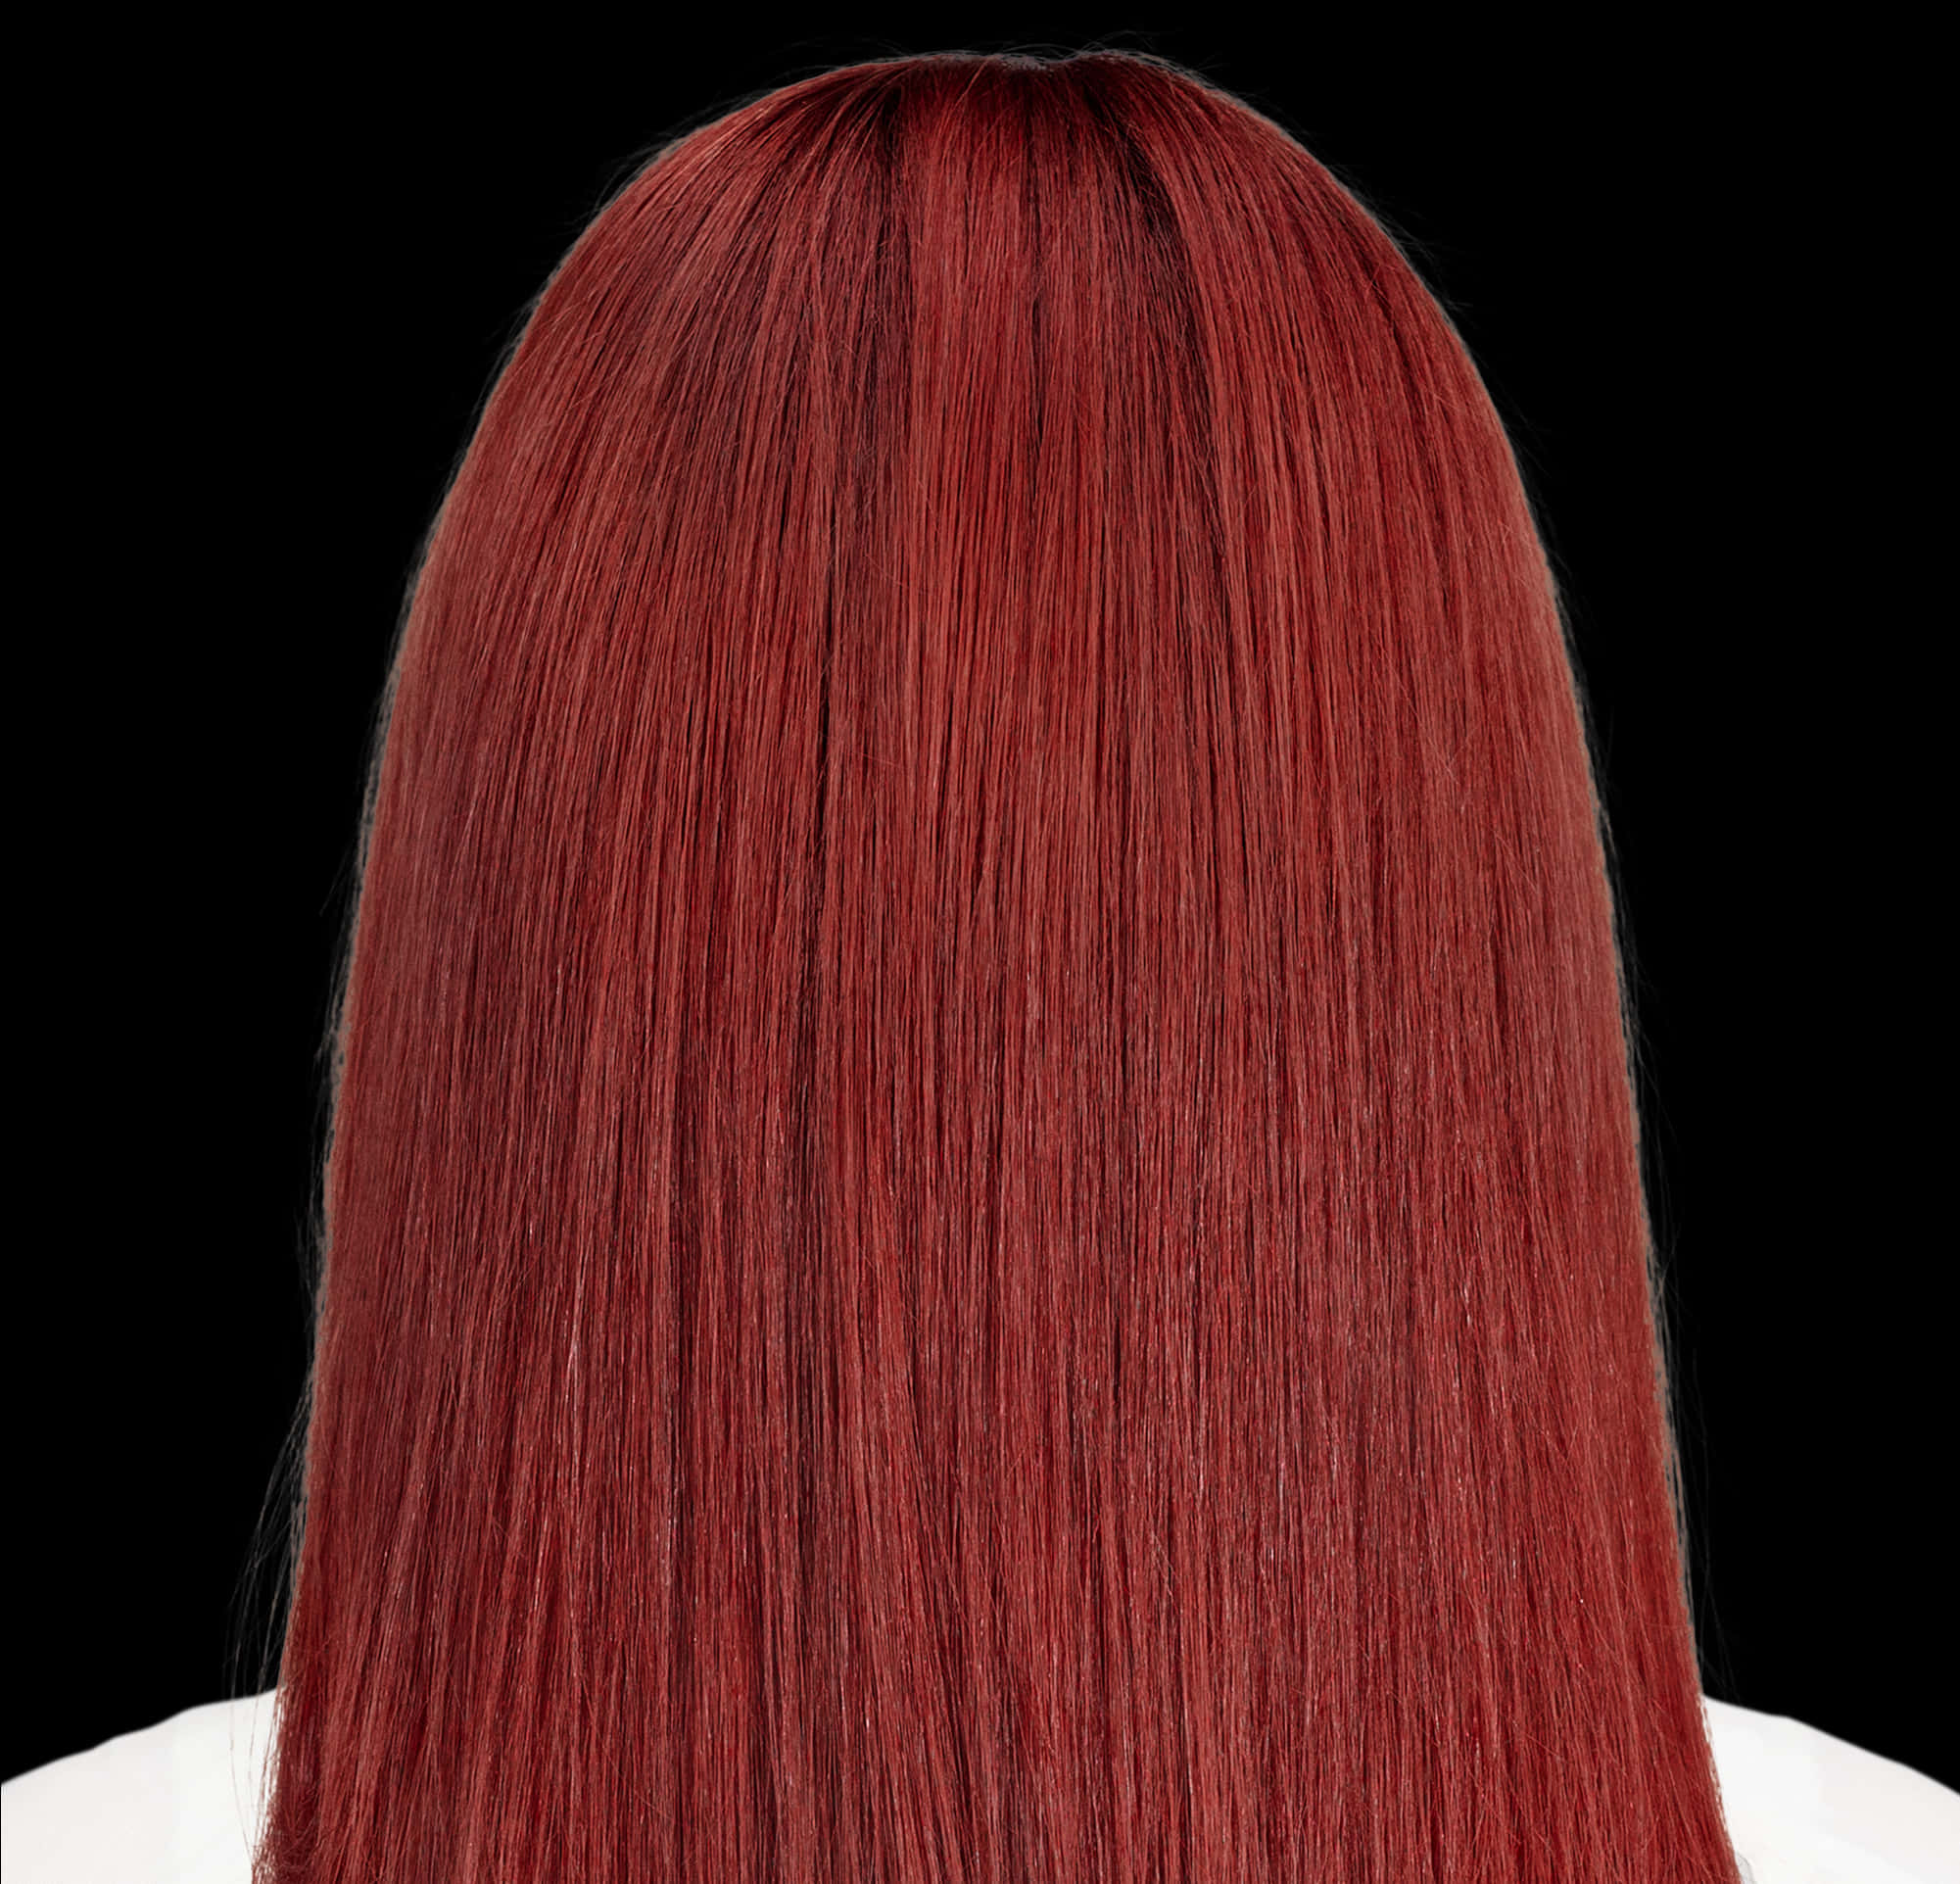 A Woman's Head With Red Hair